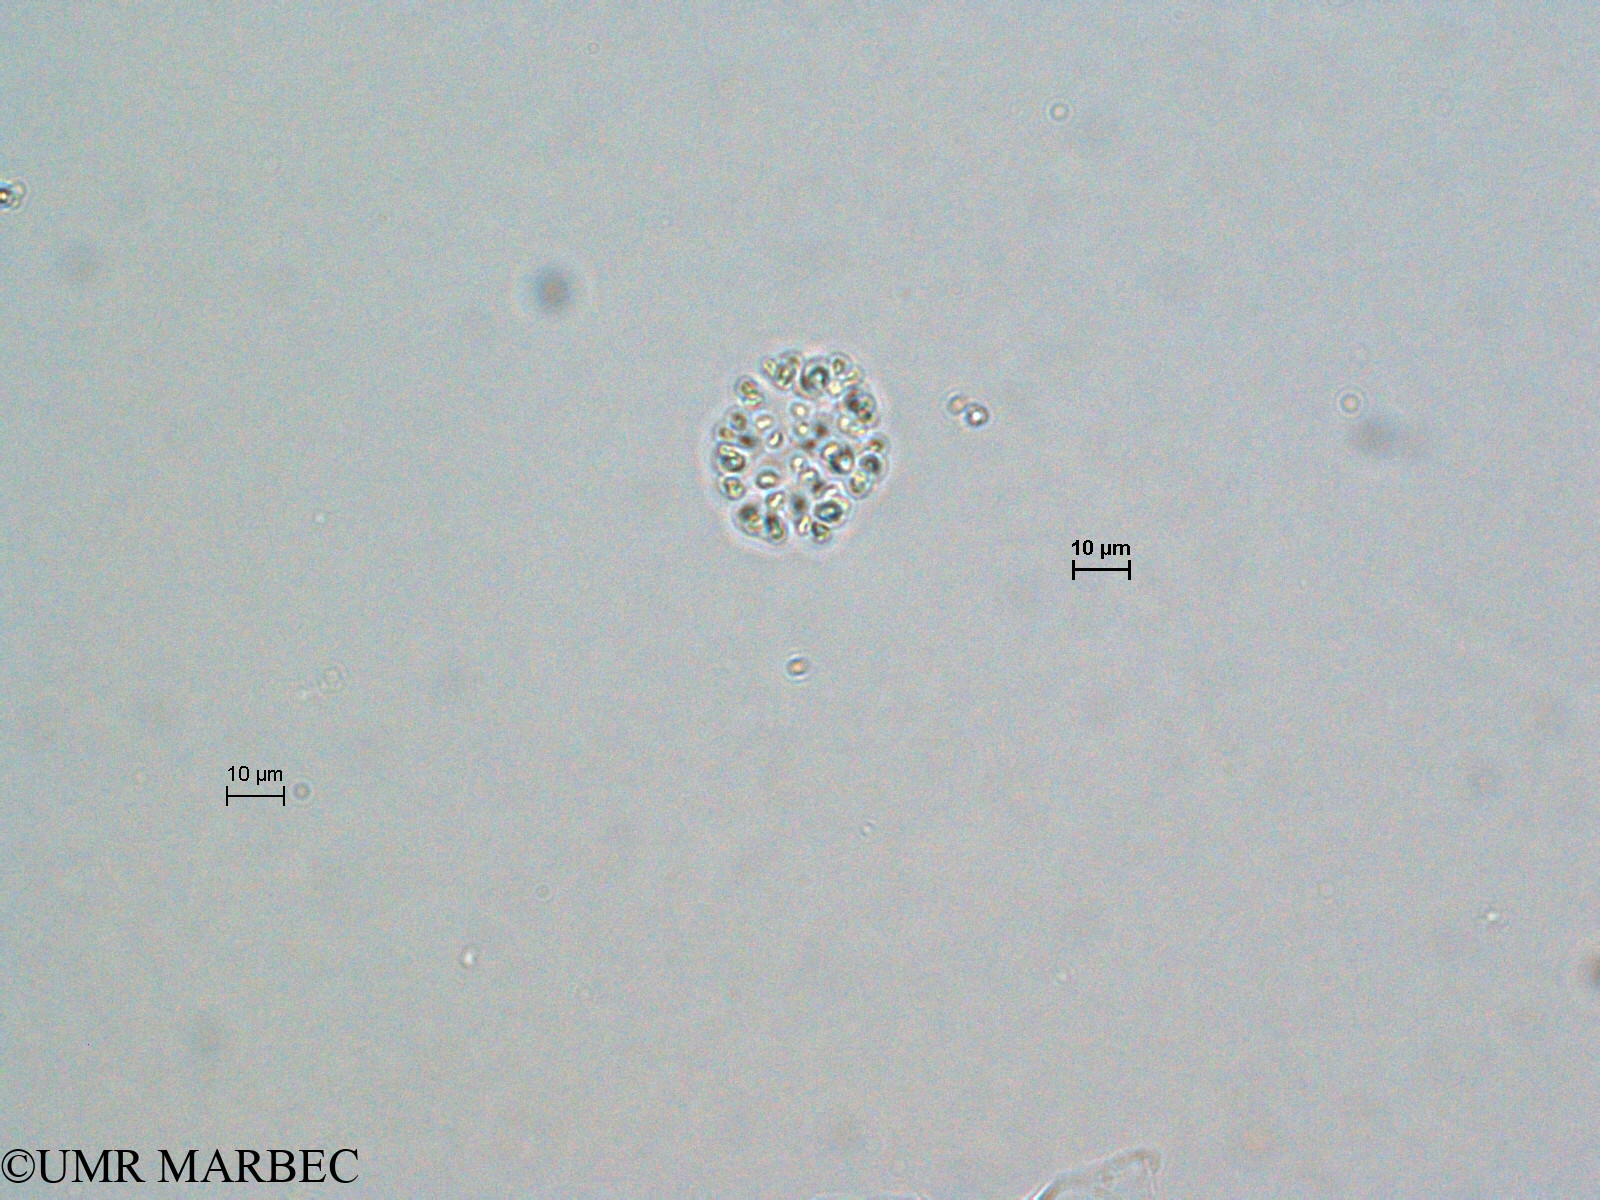 phyto/Scattered_Islands/europa/COMMA April 2011/Botryococcus sp (1)(copy).jpg